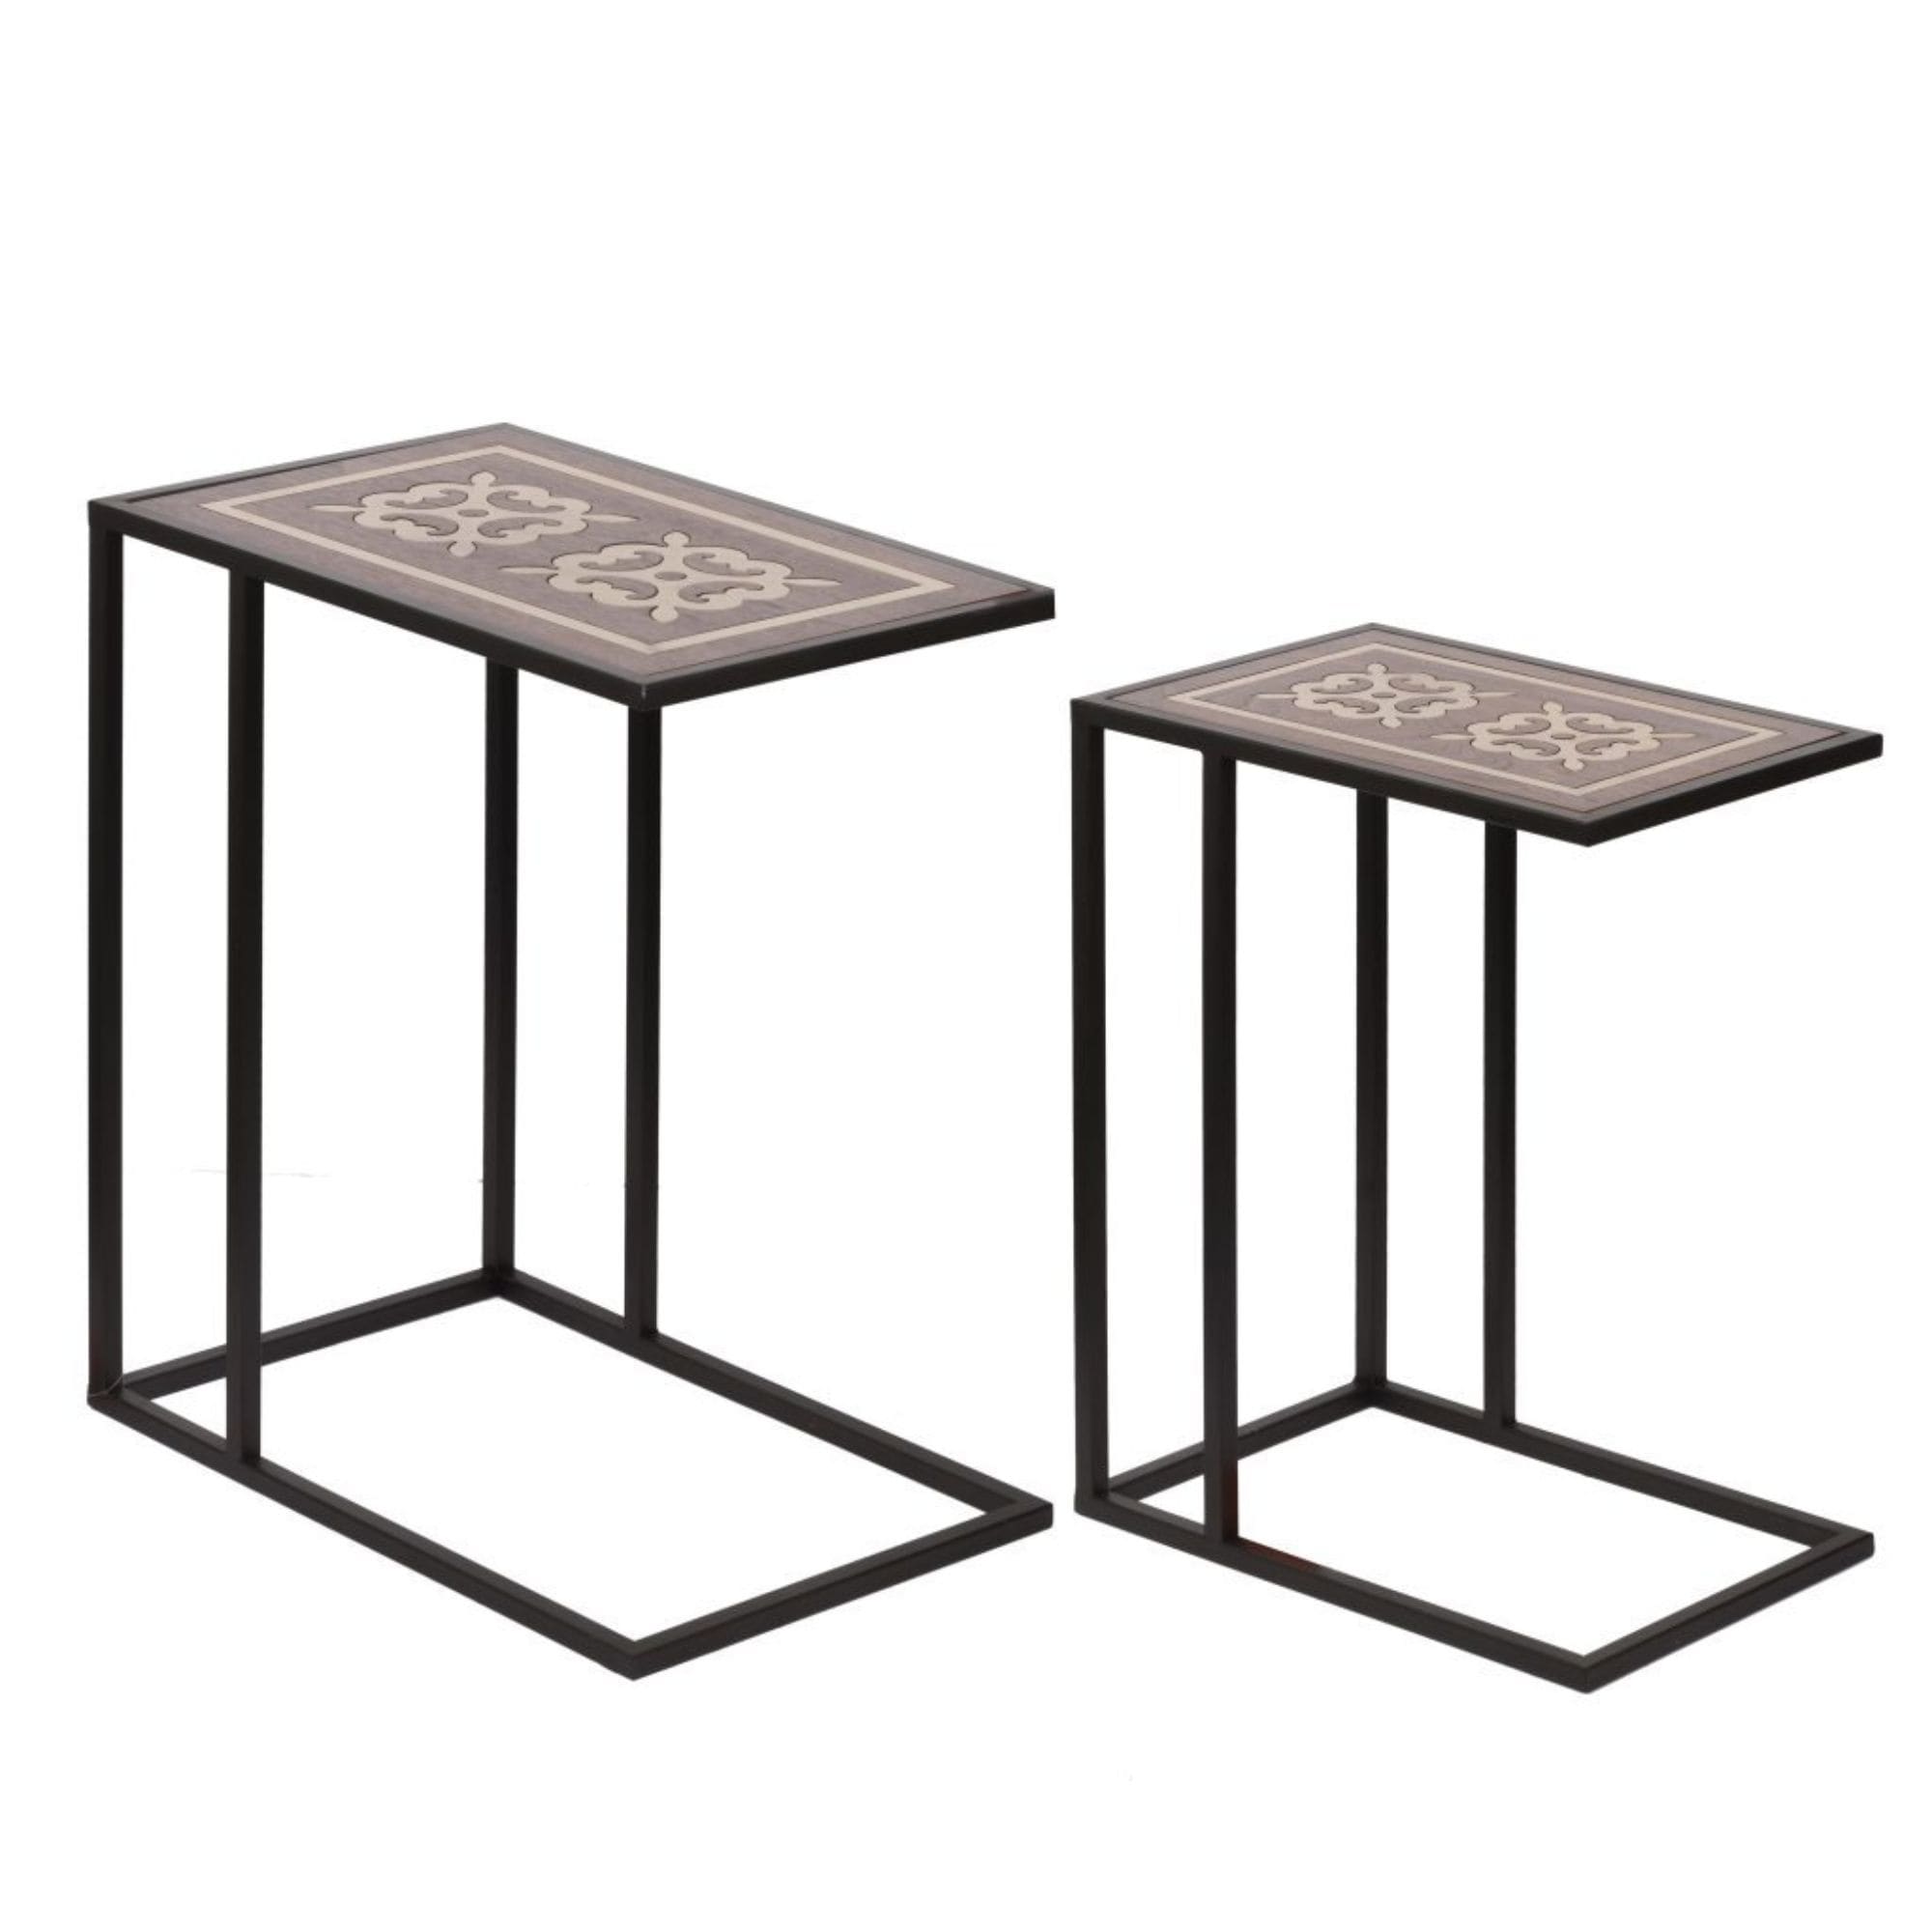 CC Home Furnishings Set of 2 Black Brown Classic Vintage Style Inlaid Nesting Tables 24 inch